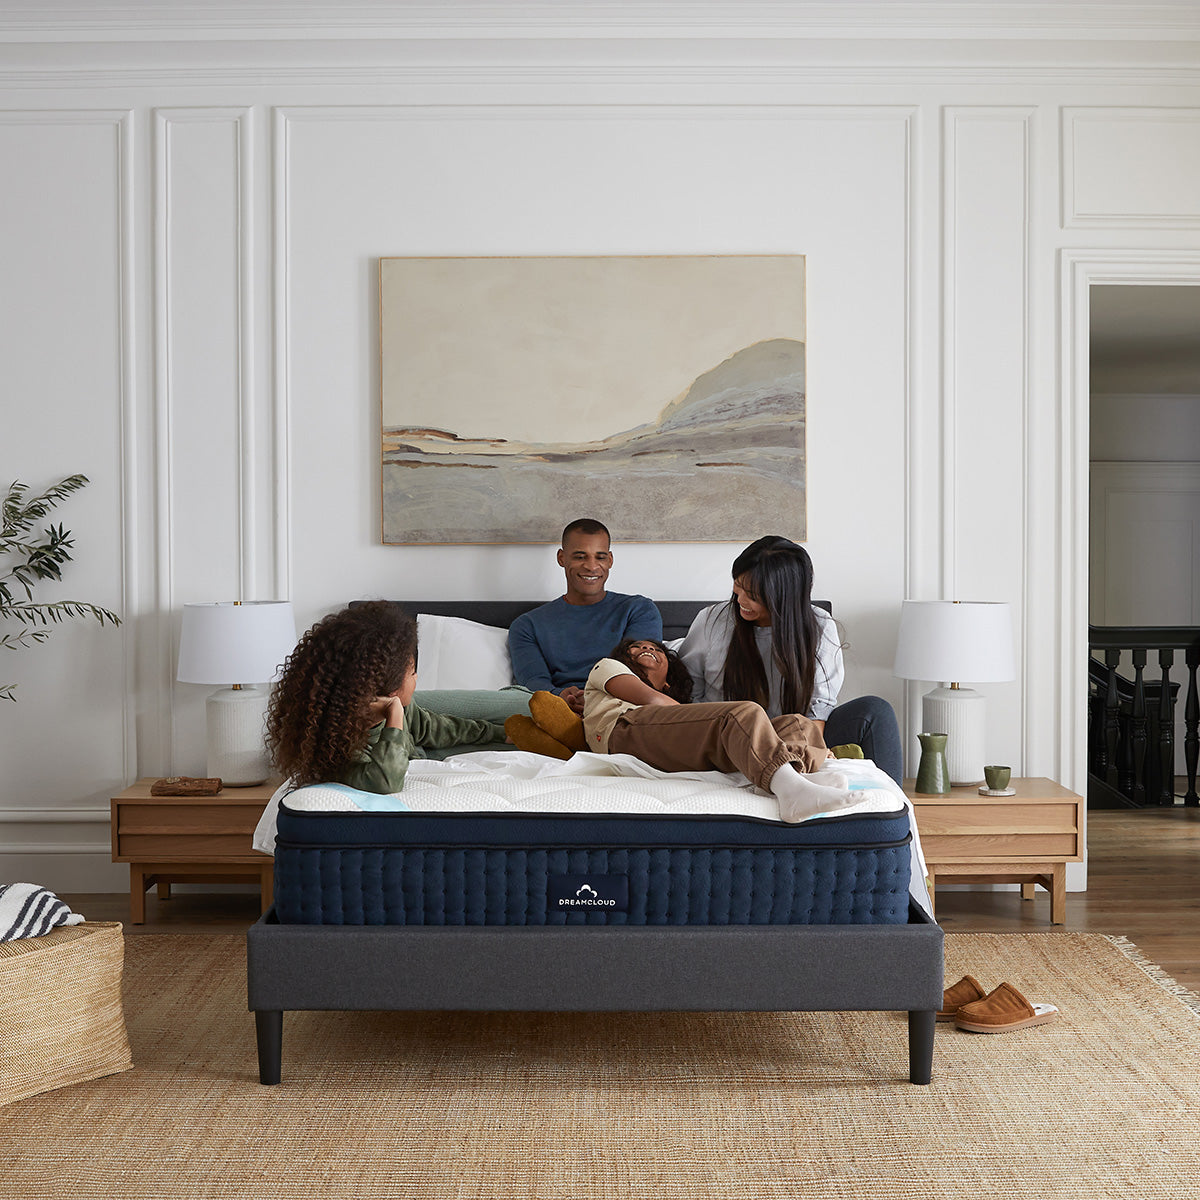 Family Laughing and Relaxing On The DreamCloud Premier Hybrid Mattress